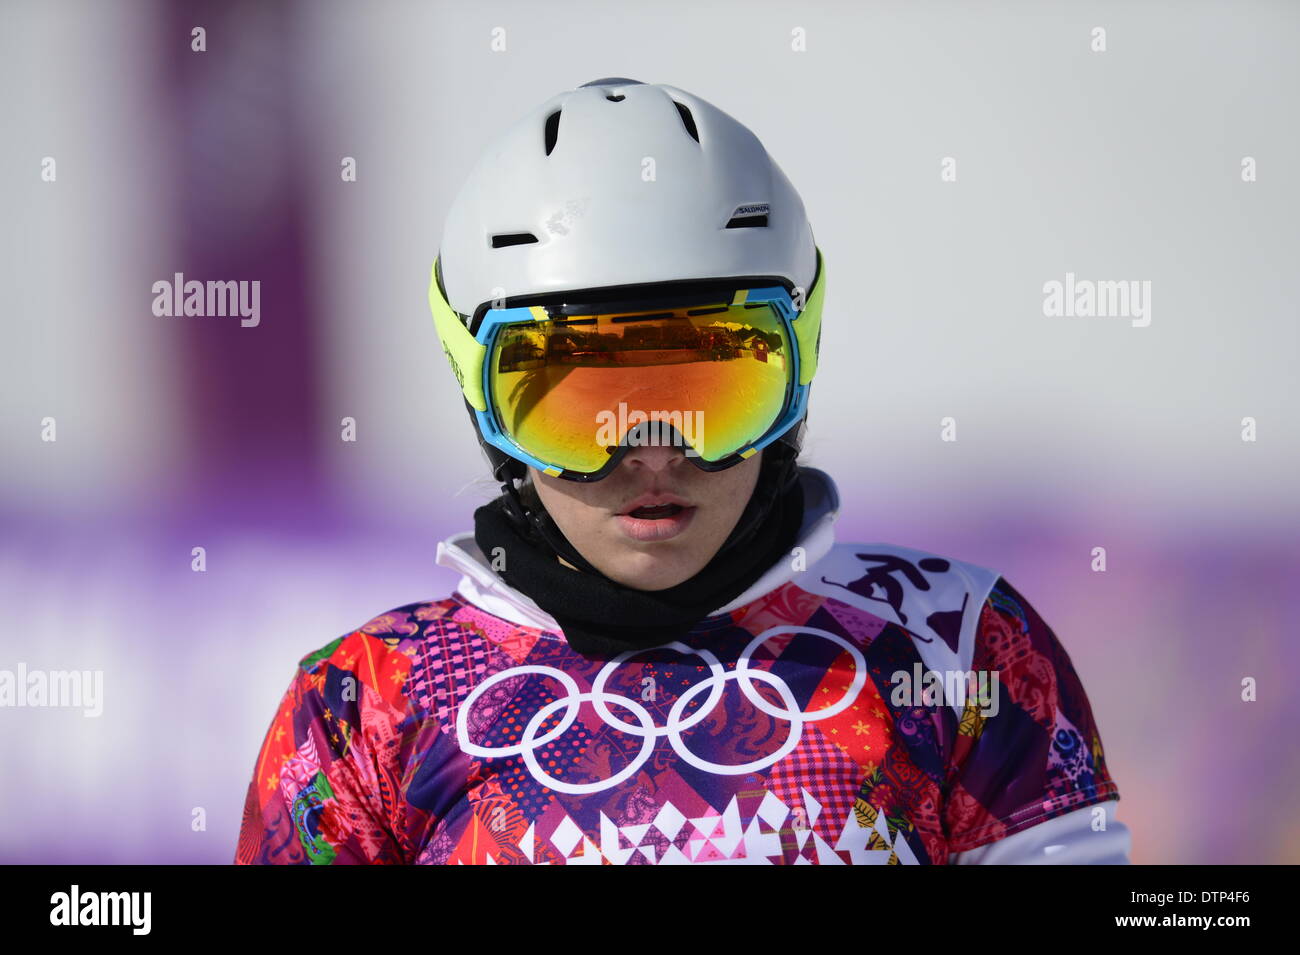 Ester Ledecka of Czech Republic pictured during the snowboard parallel  slalom competition at the 2014 Winter Olympics, Saturday, February 22,  2014, in Krasnaya Polyana, Russia. (CTK Photo/Roman Vondrous Stock Photo -  Alamy